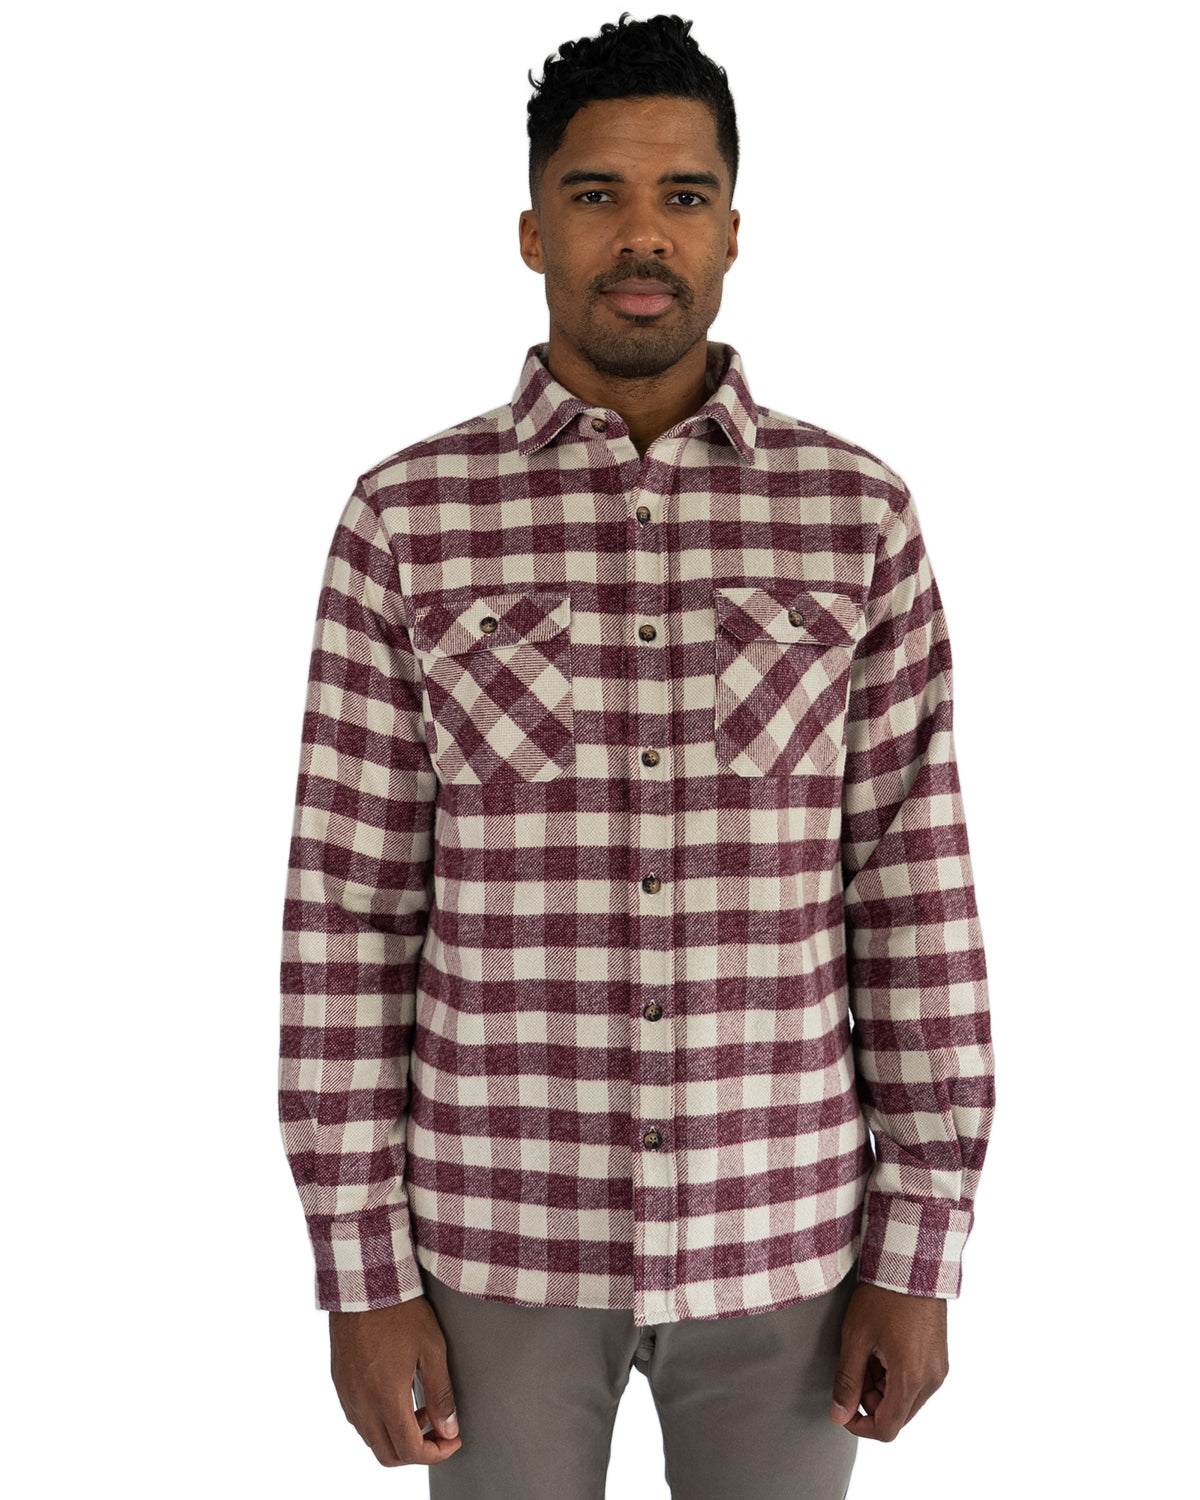 The Grand Flannel, Heavyweight Cotton Flannel Shirt for Men by MuskOx ...